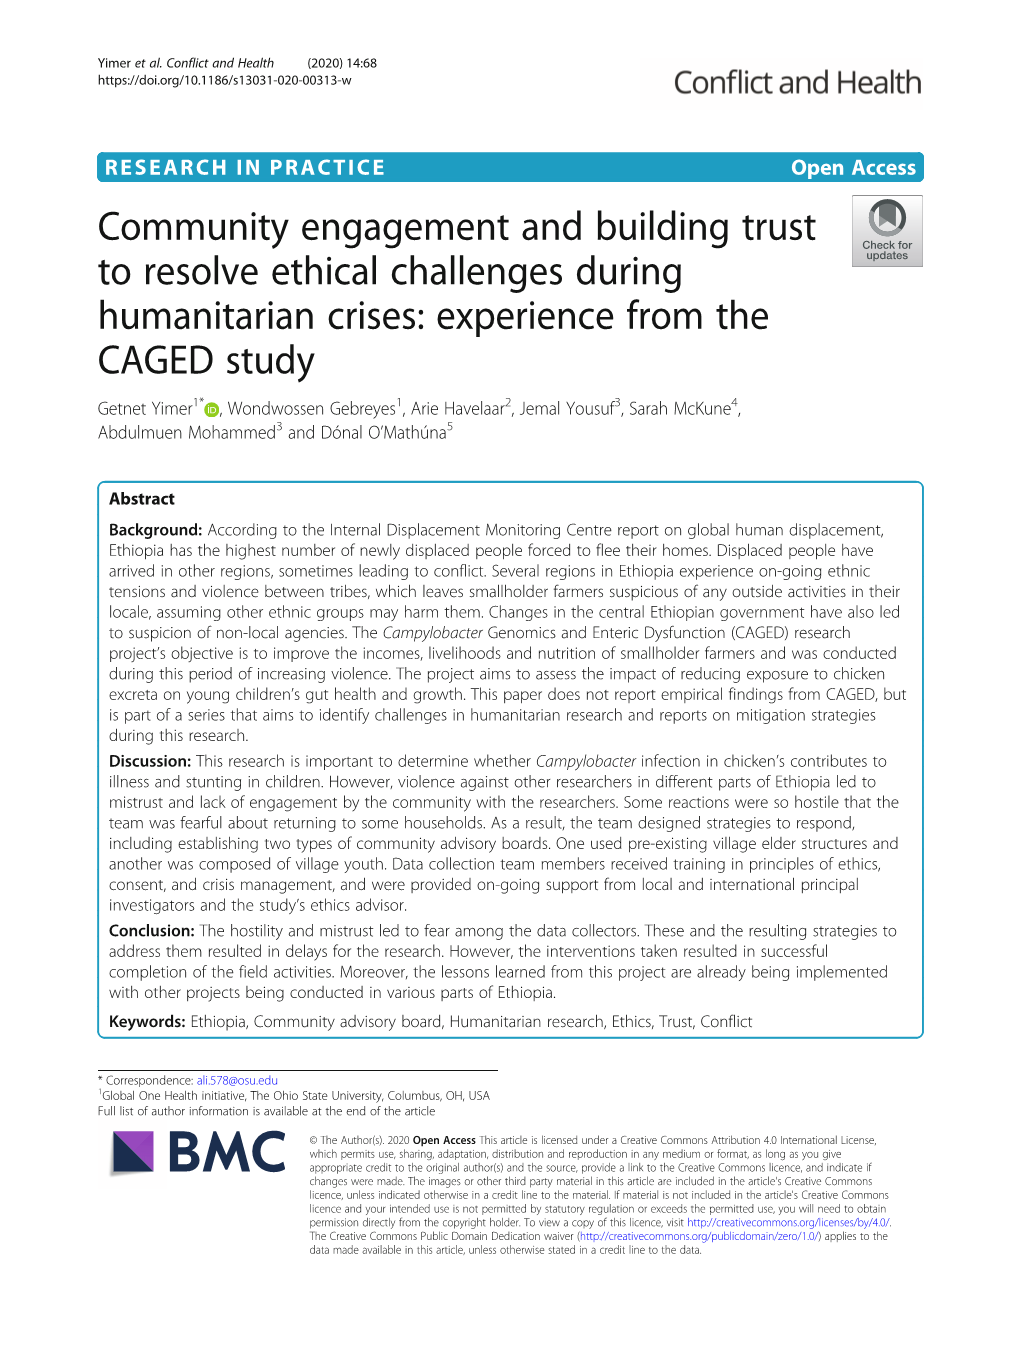 Community Engagement and Building Trust to Resolve